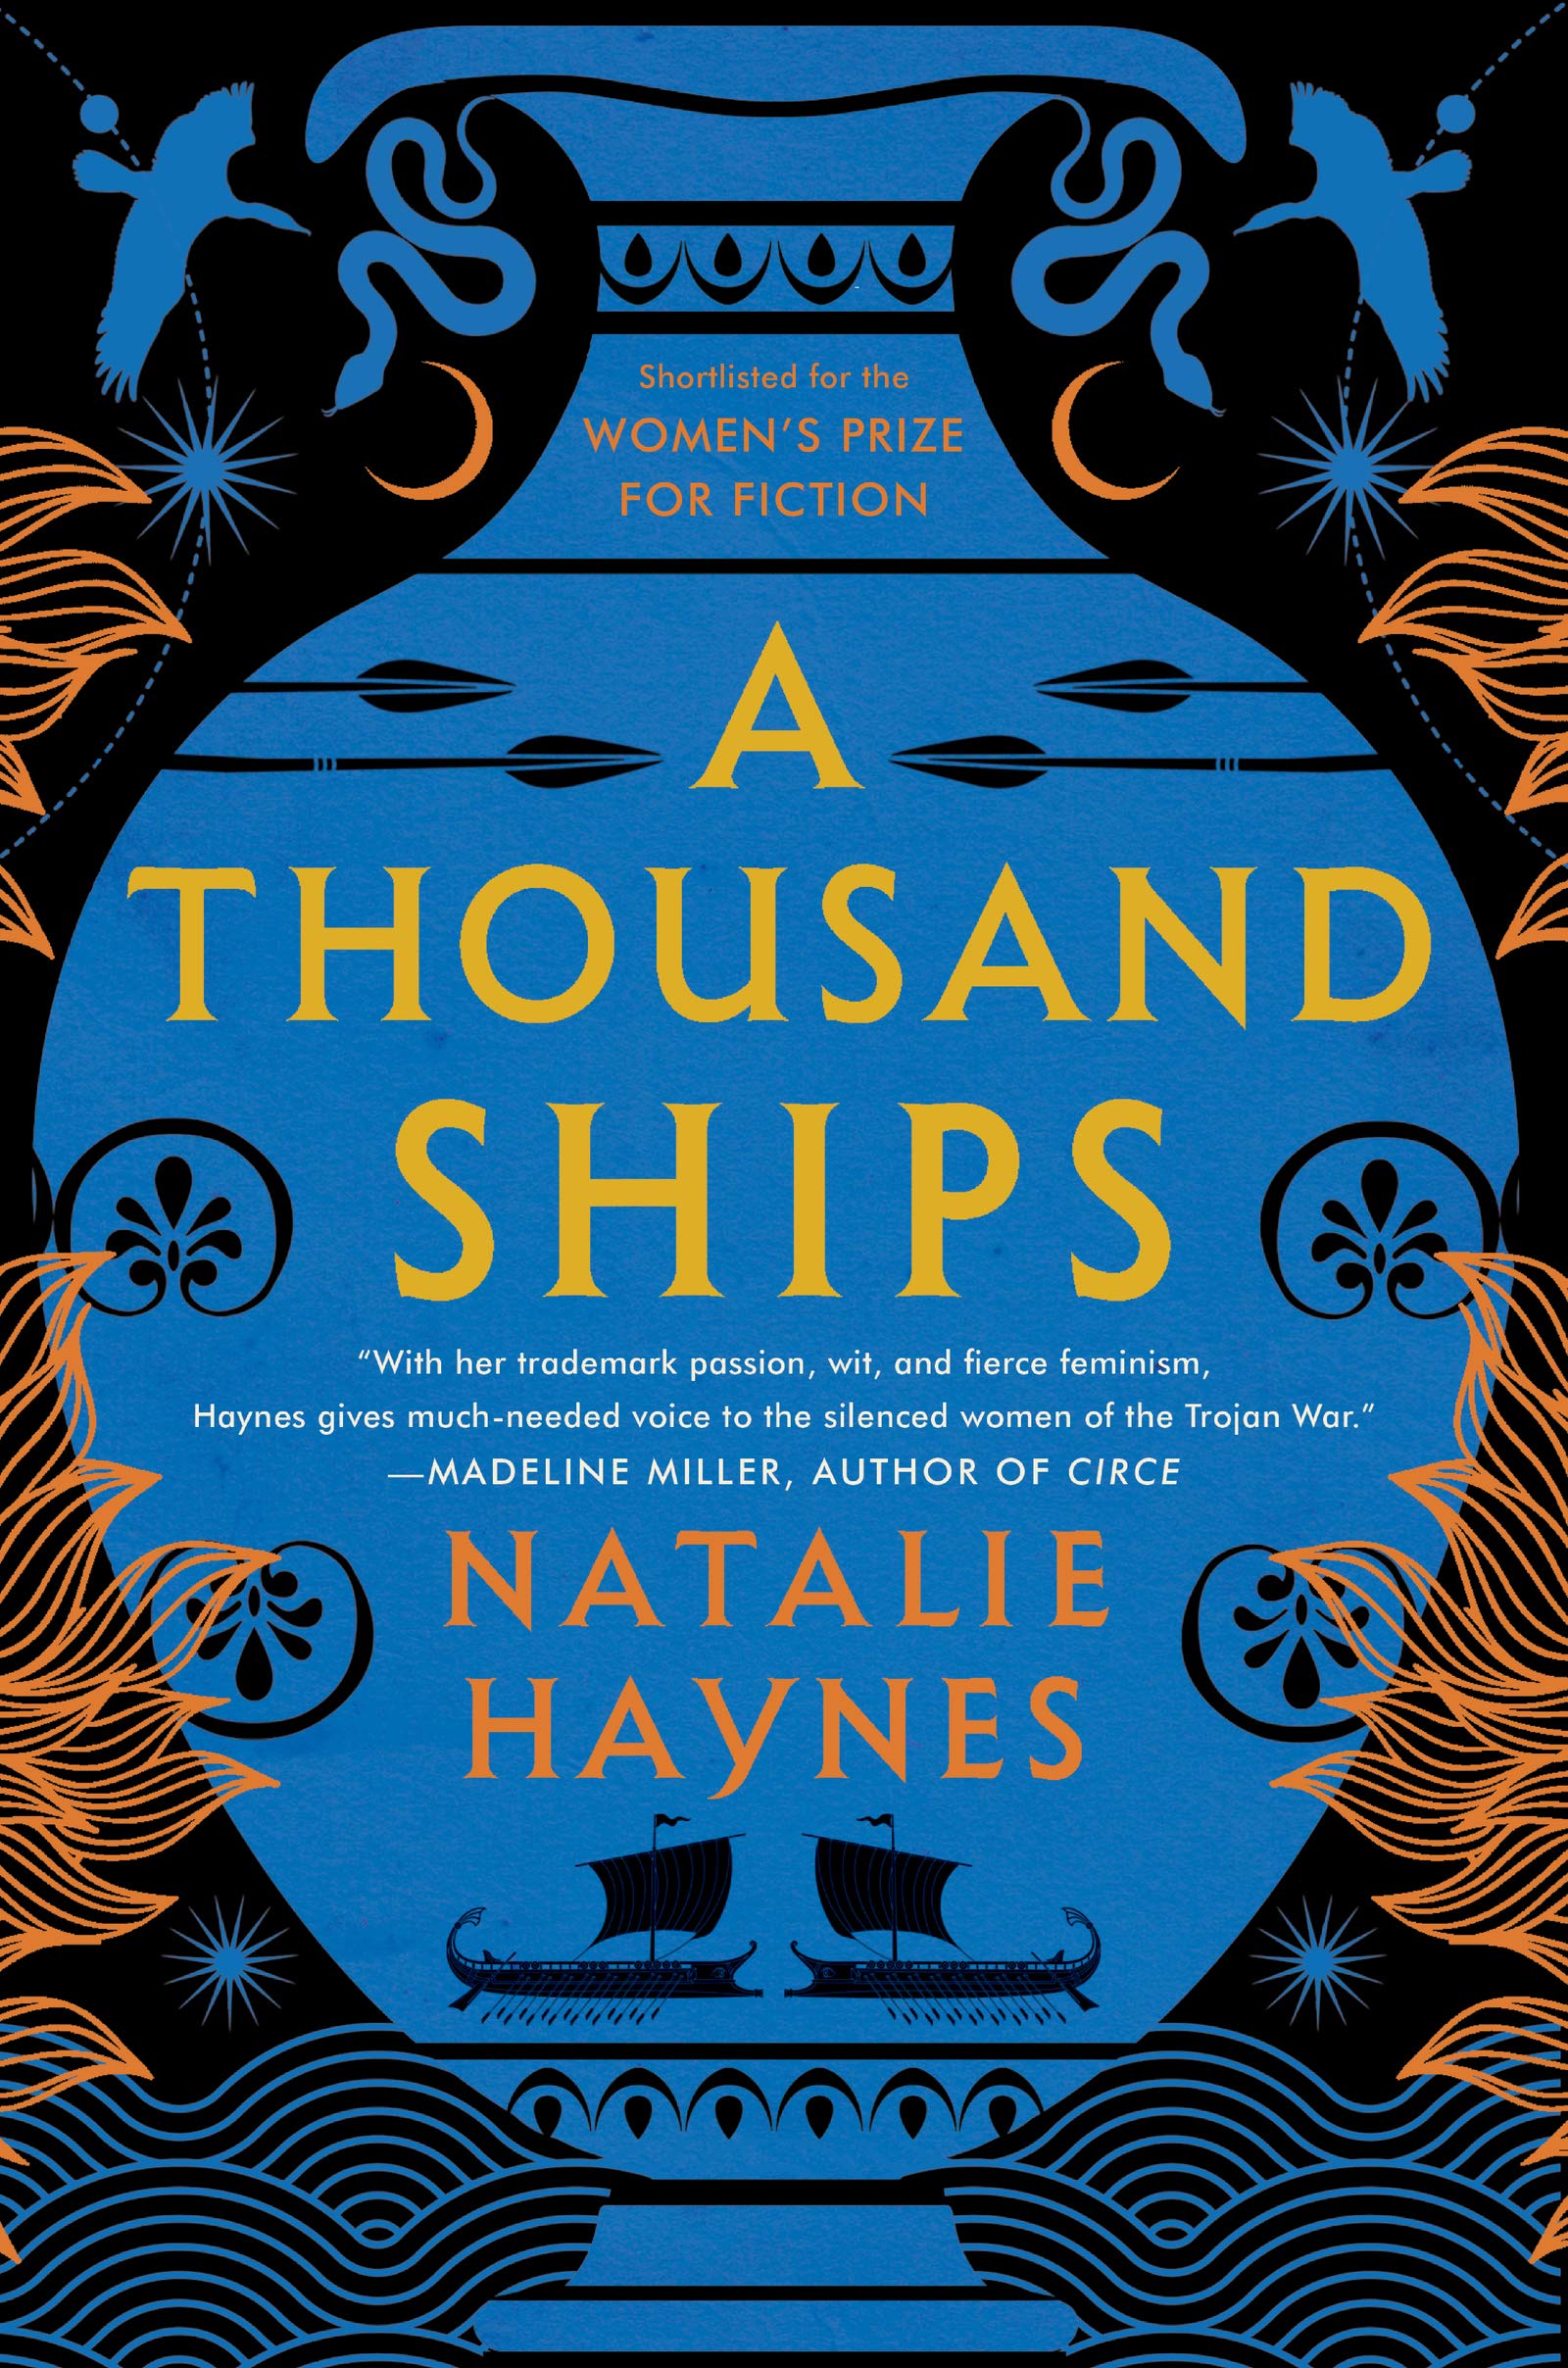 Image for "A Thousand Ships"